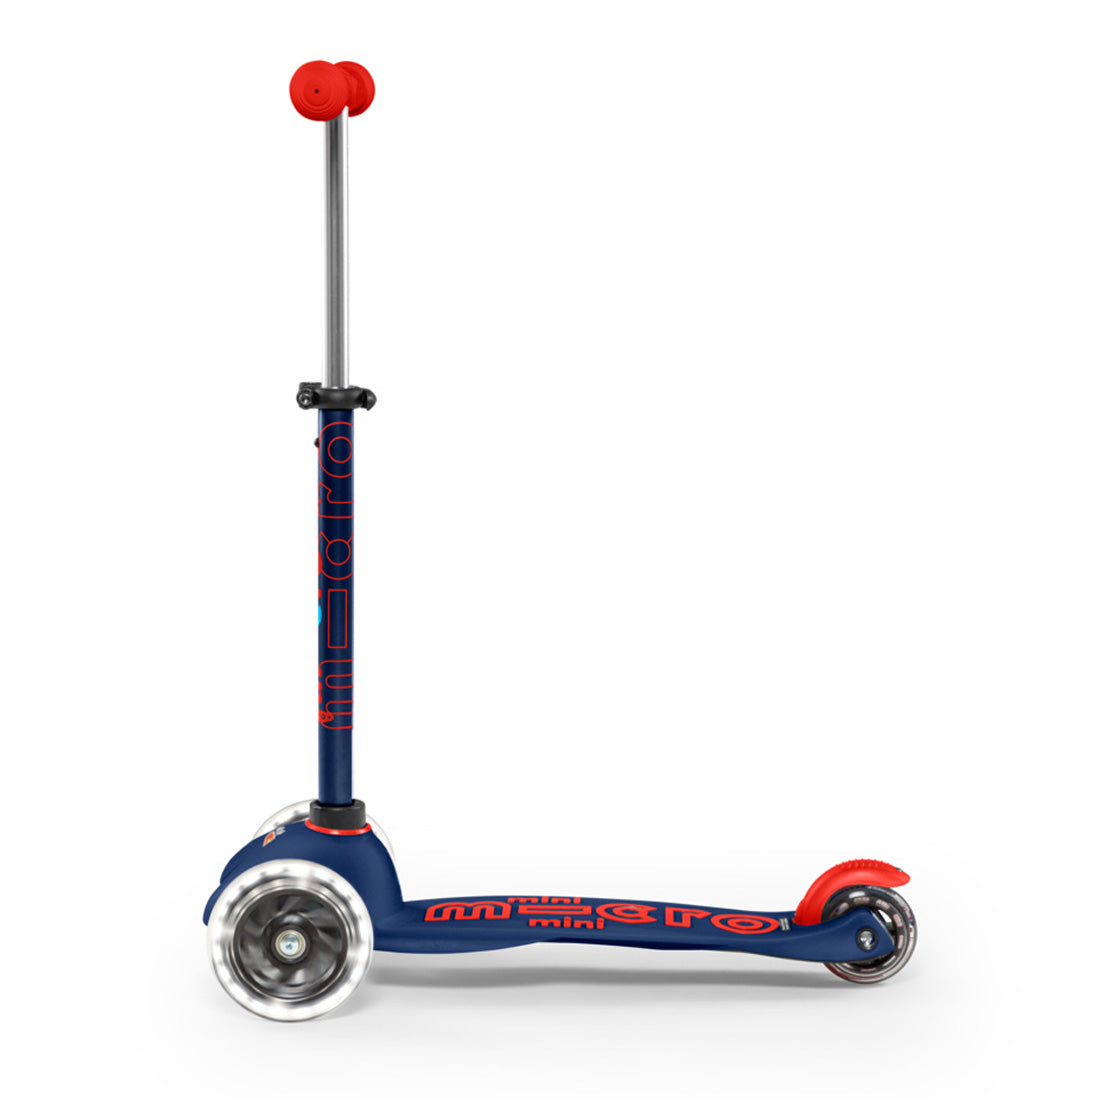 Micro Mini Deluxe LED Scooter - Navy/Red Scooter Completes Rec